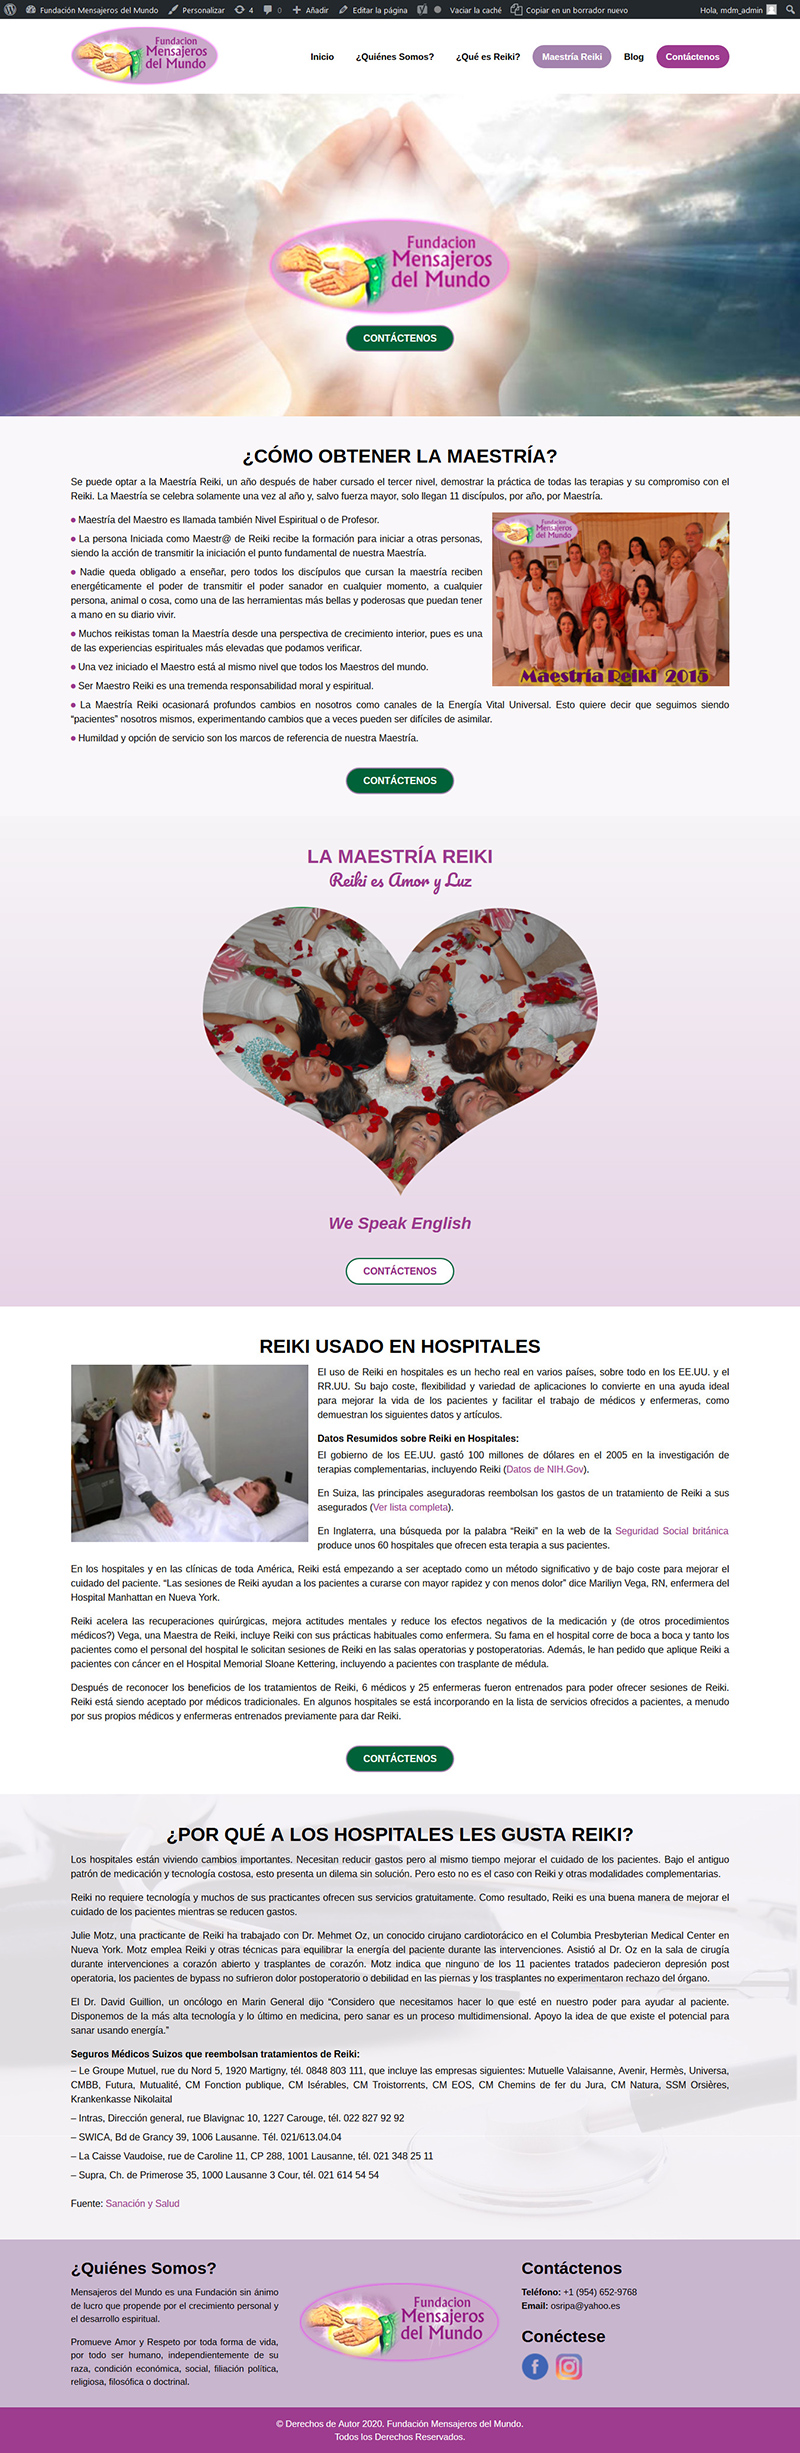 Website "Mensajeros del Mundo": Page "Reiki Master" viewed on large-screen devices.